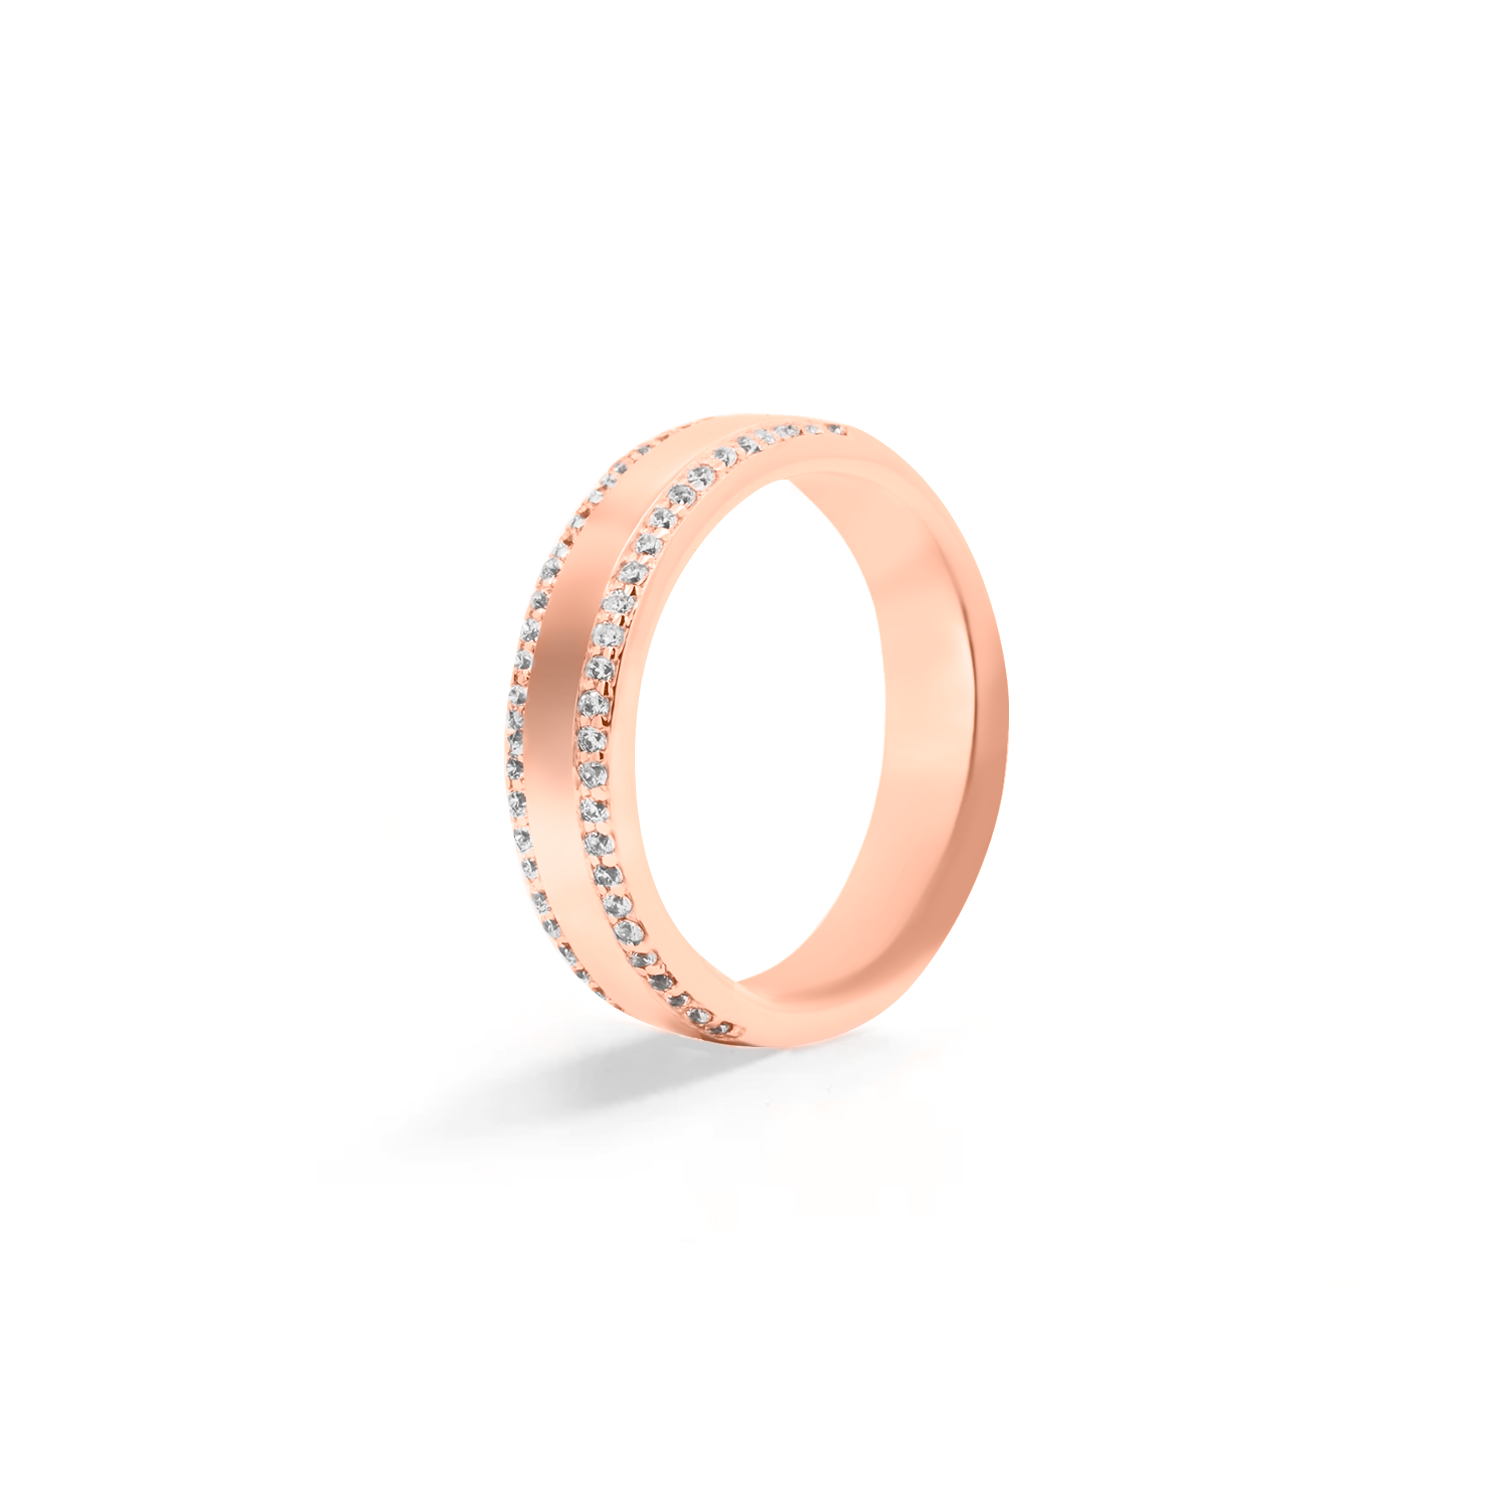 Classic and elegant ring in rose gold with cubic zirconia.